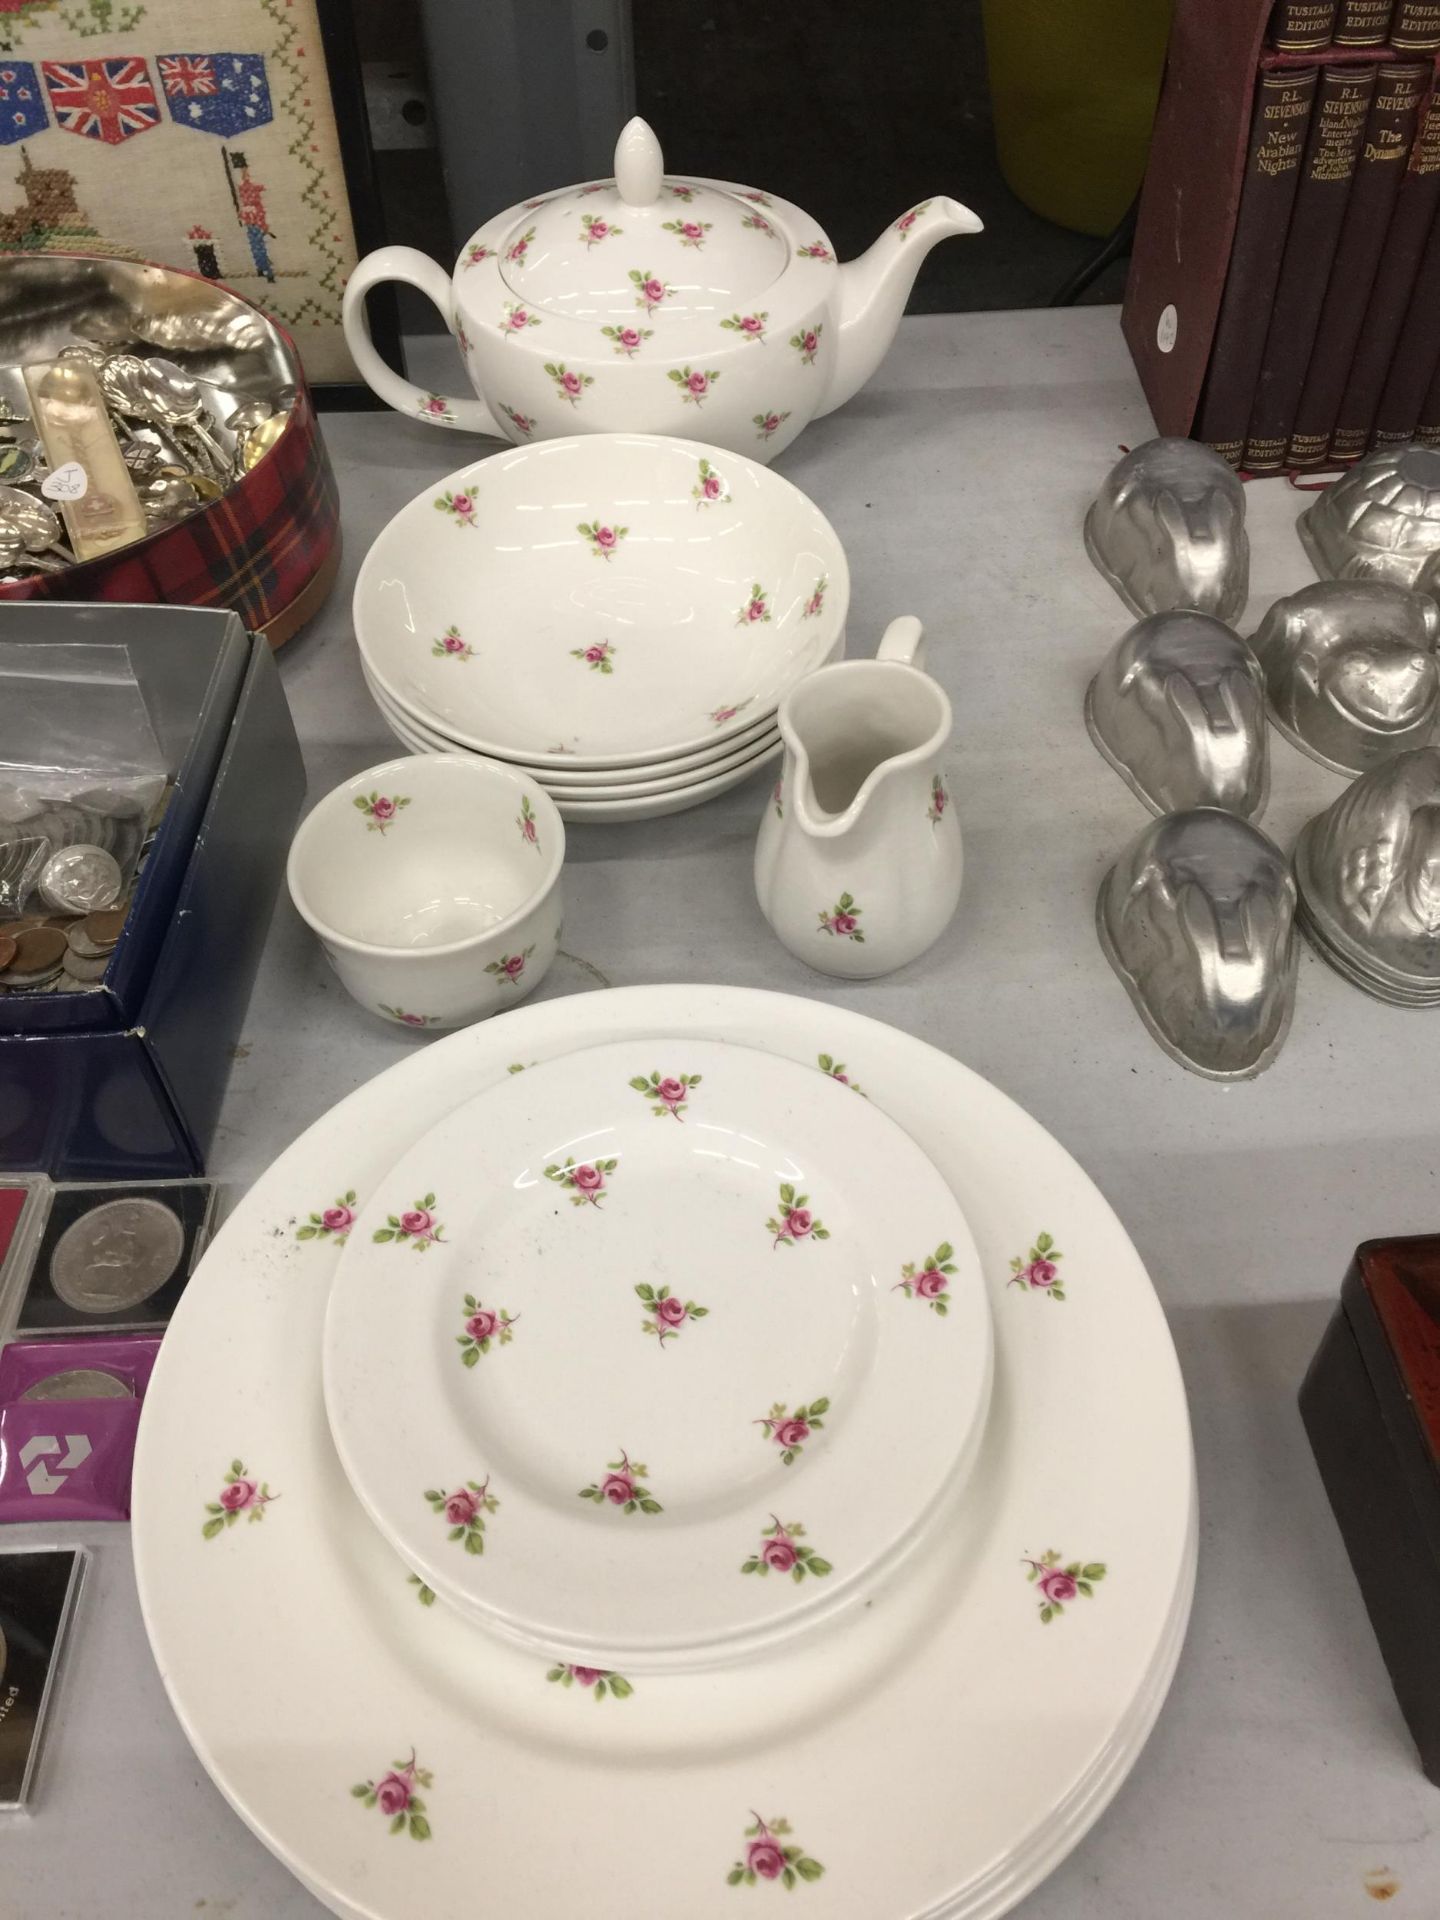 A QUANTITY OF CHINA TEAWARE TO INCLUDE PLATES, BOWLS, A TEAPOT, CREAM JUG AND SUGAR BOWL